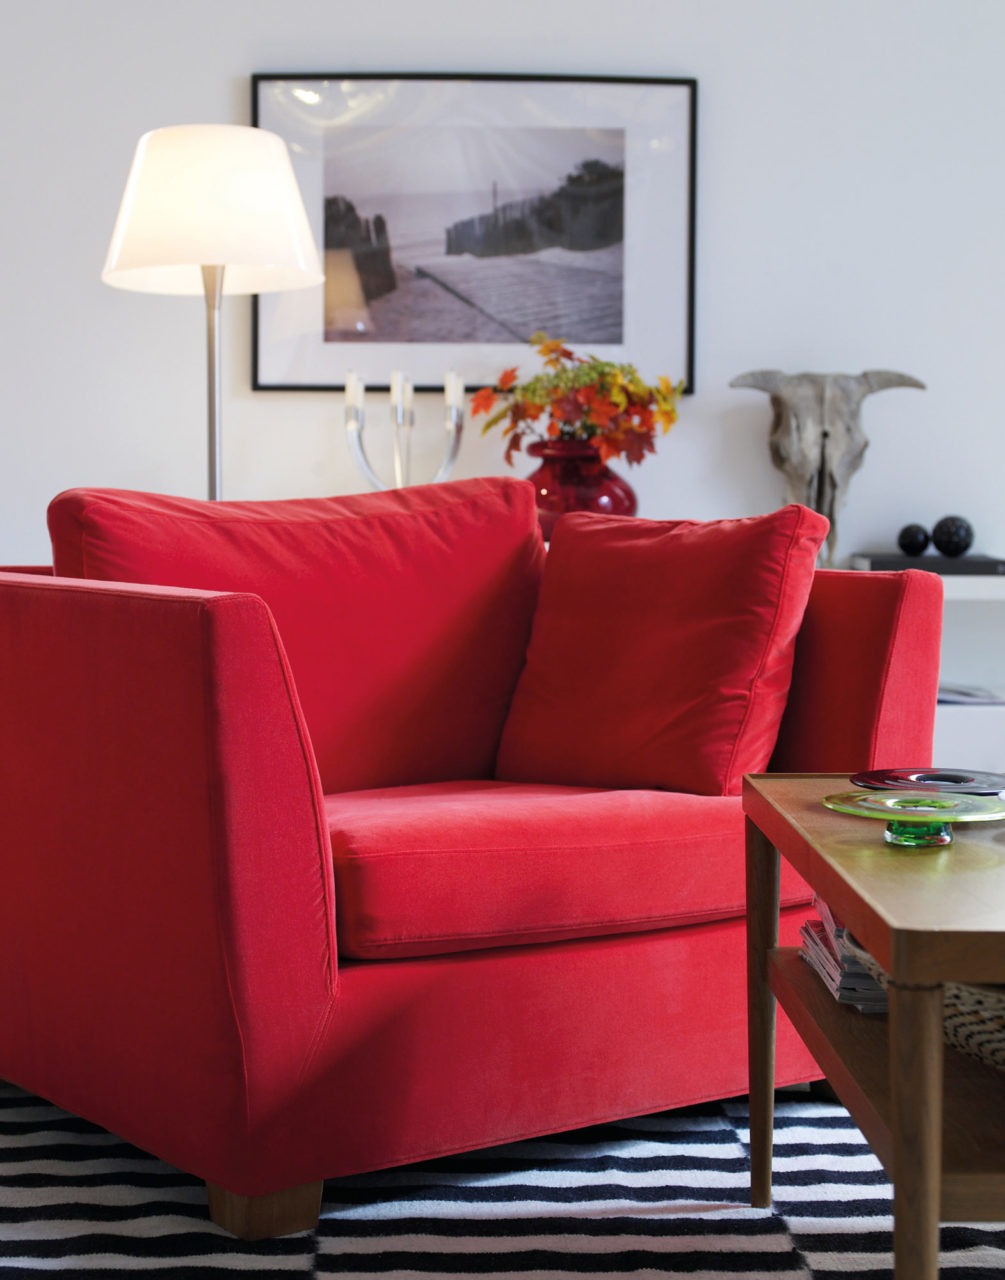 Large red velvet armchair and brown coffee table, in the background a lit floor lamp and a picture on the wall.